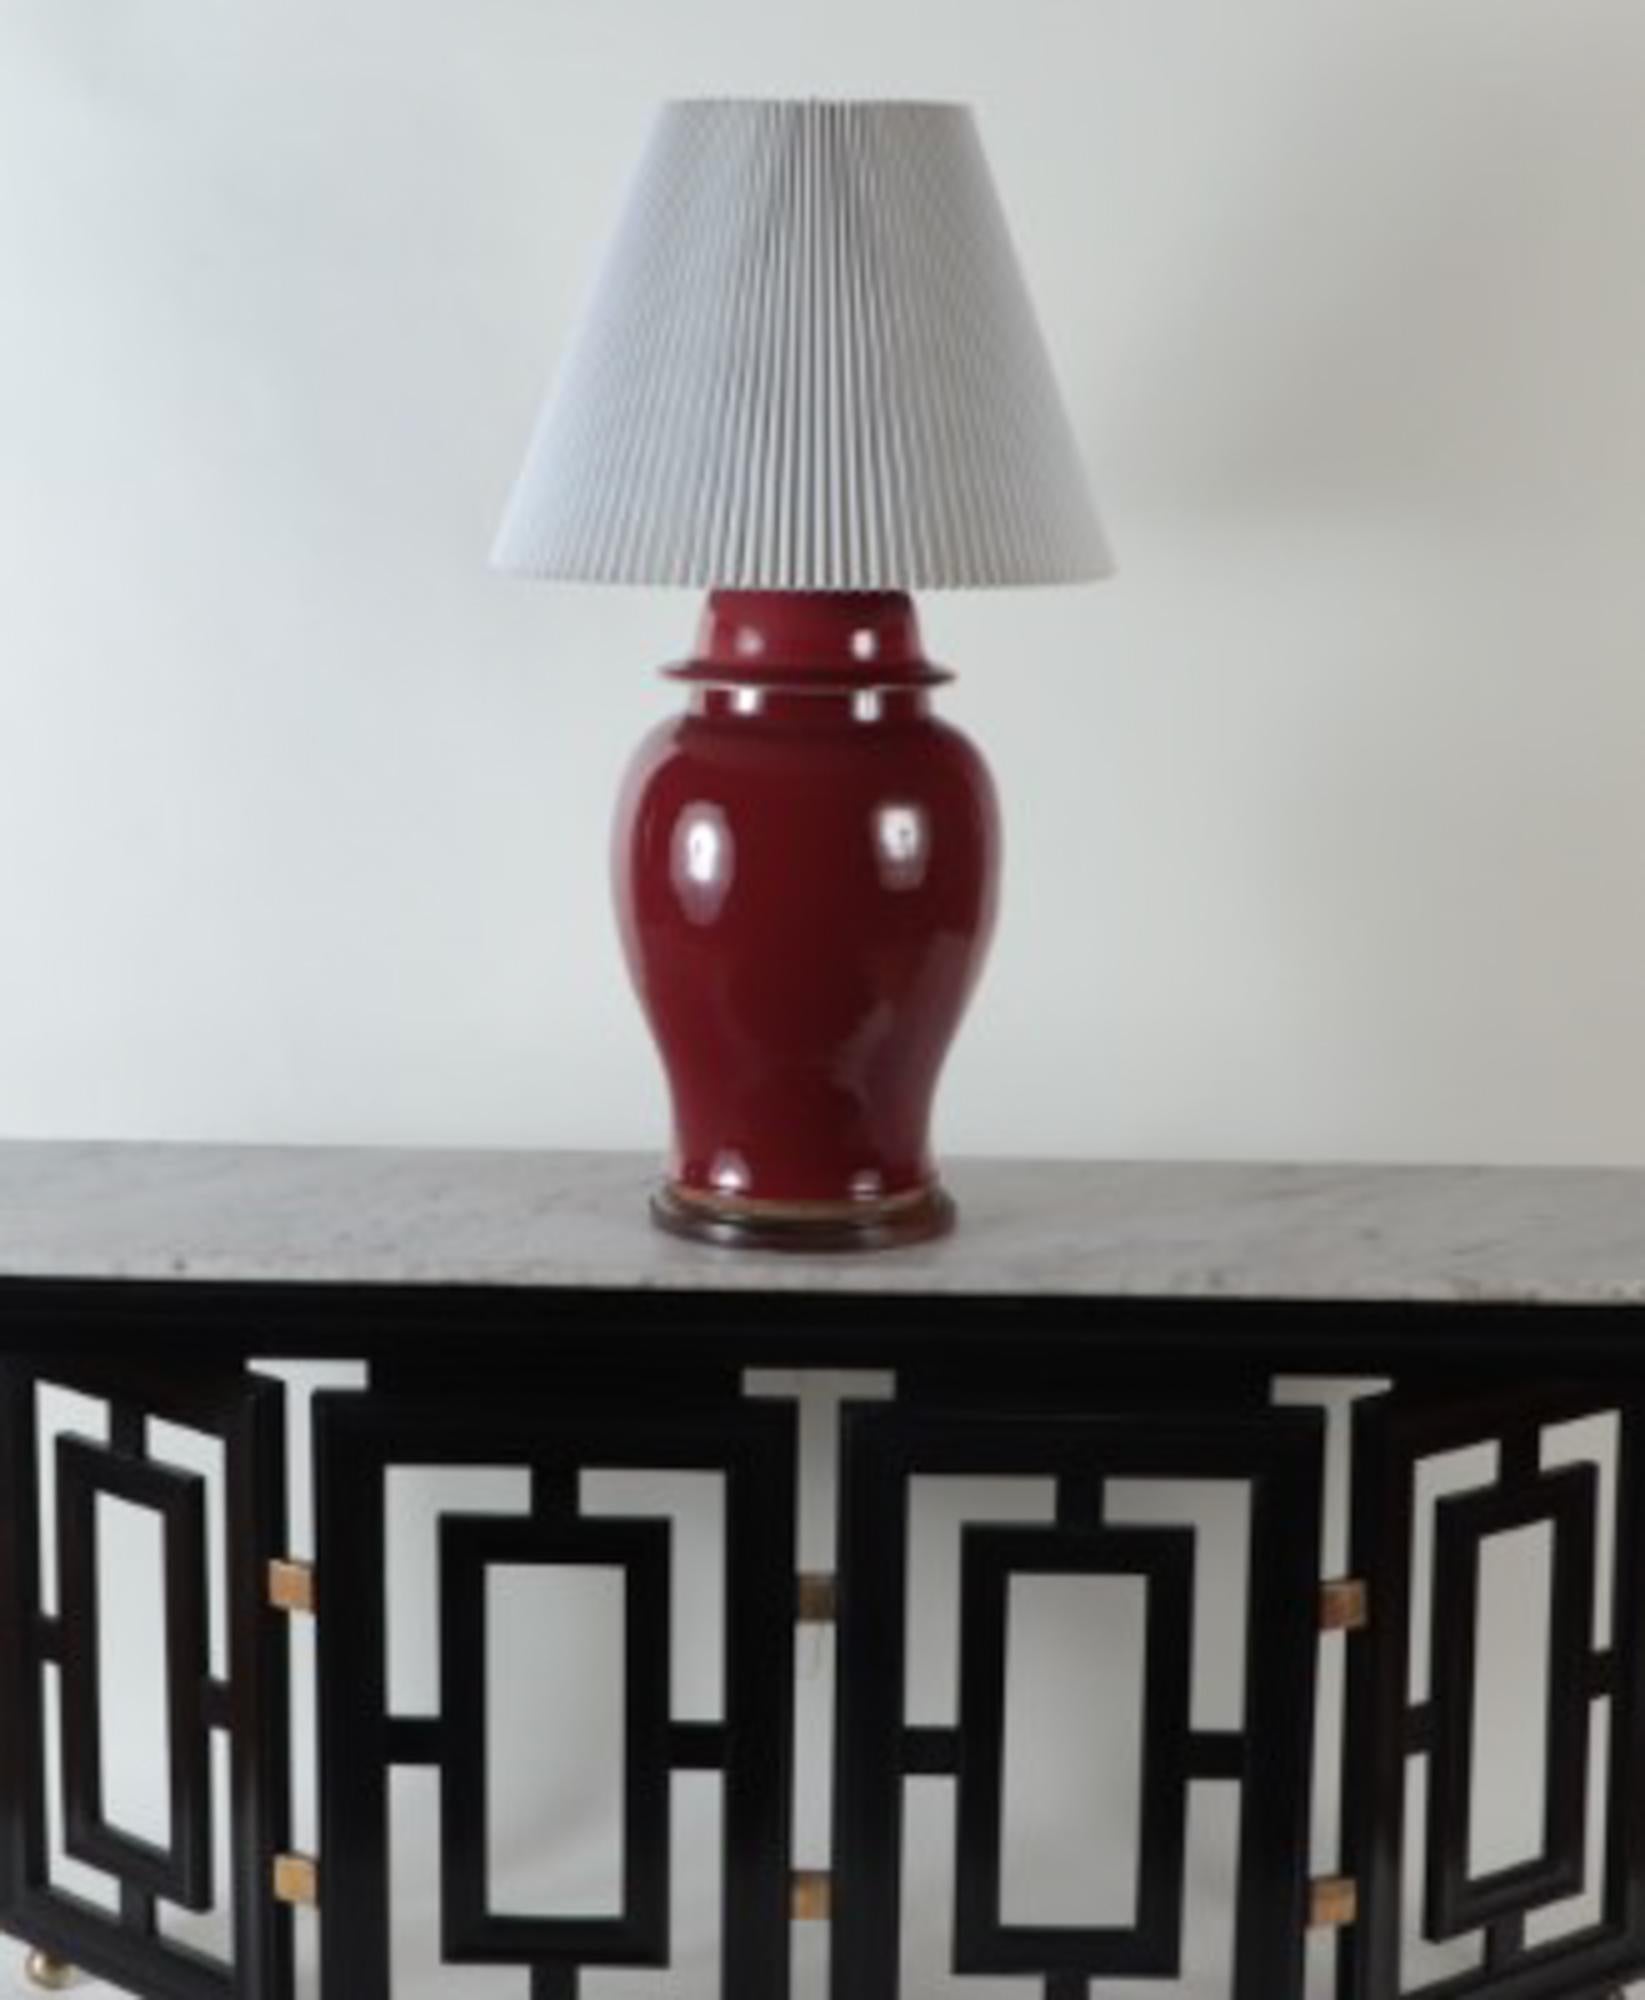 An oxblood vase with gilt wood base table lamp. Antiqued finish hardware includes double sockets with on/off pull chains, adjustable height rod, and cord with on/off switch.